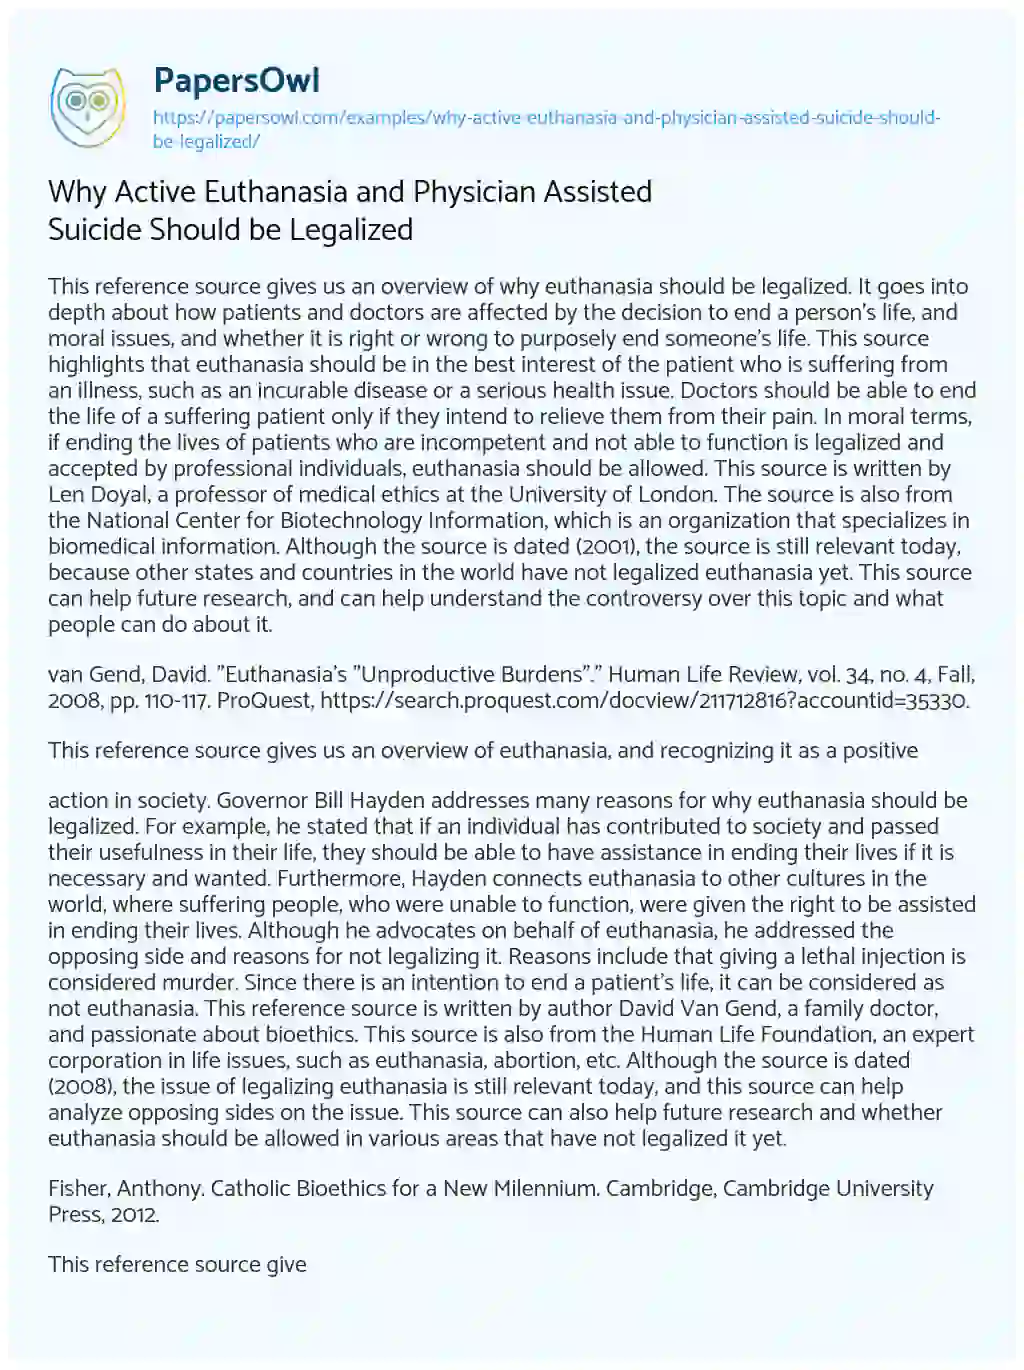 Why Active Euthanasia and Physician Assisted Suicide should be Legalized essay